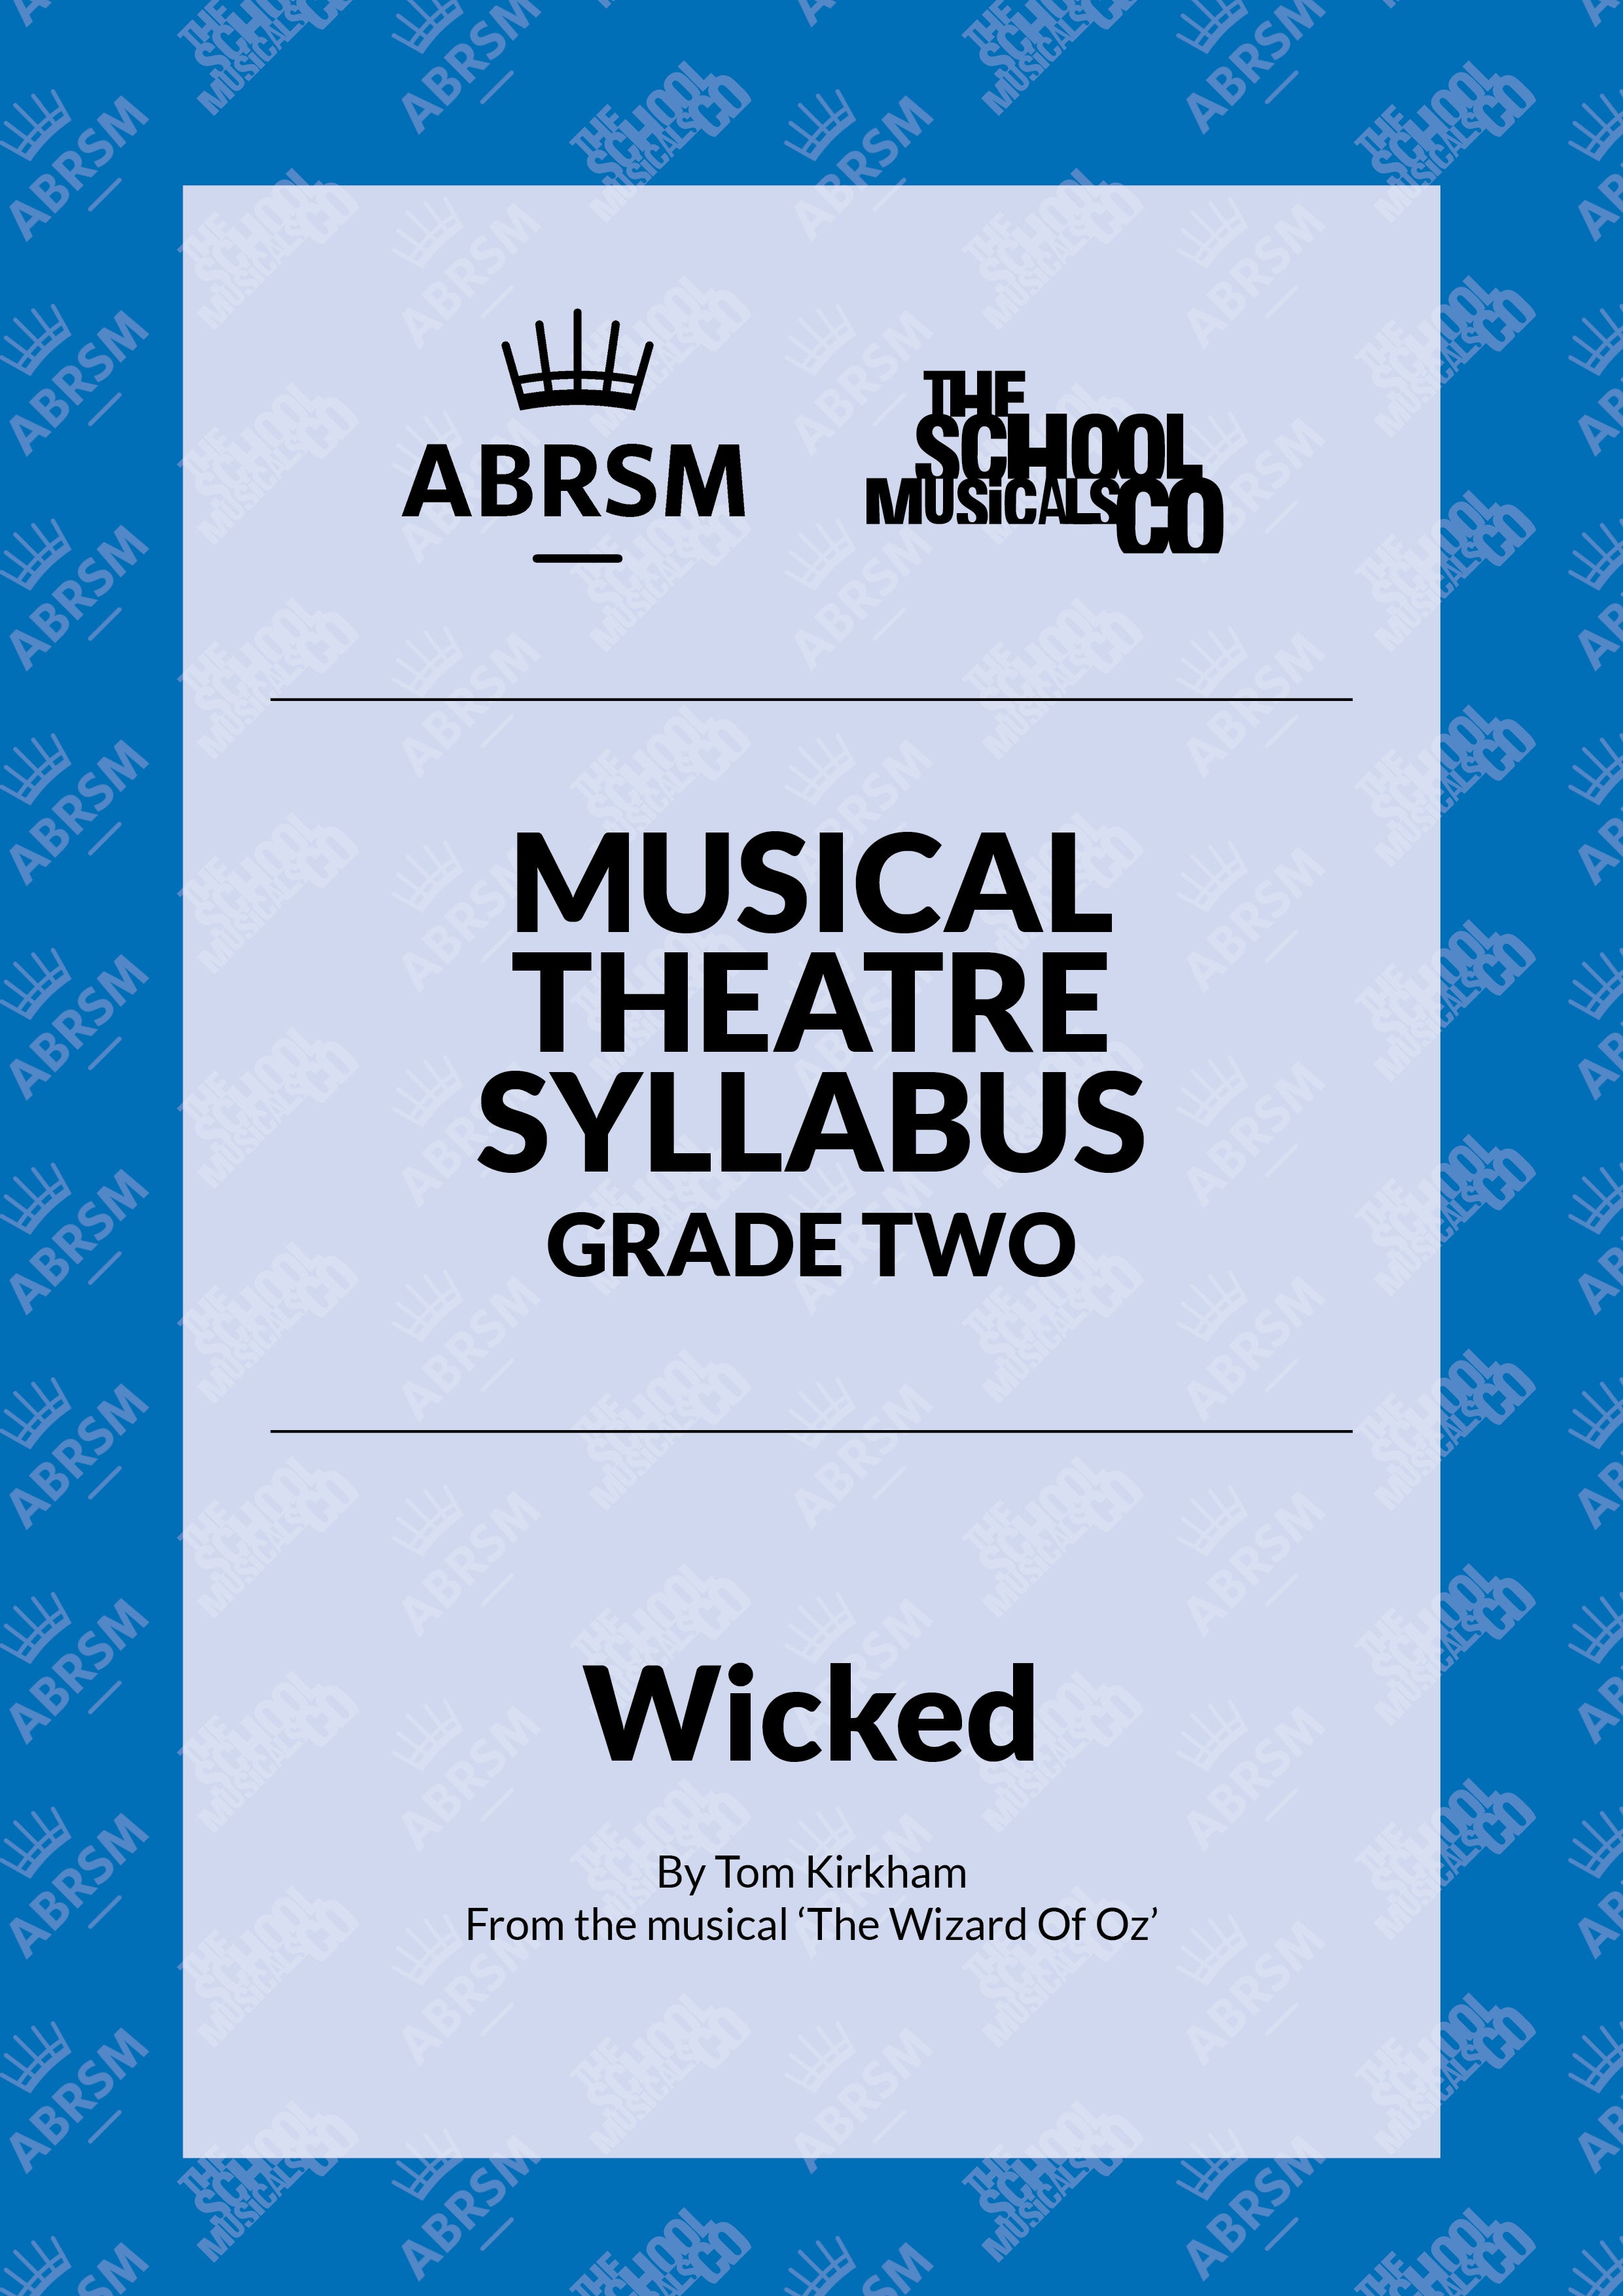 Wicked - ABRSM Musical Theatre Syllabus Grade Two